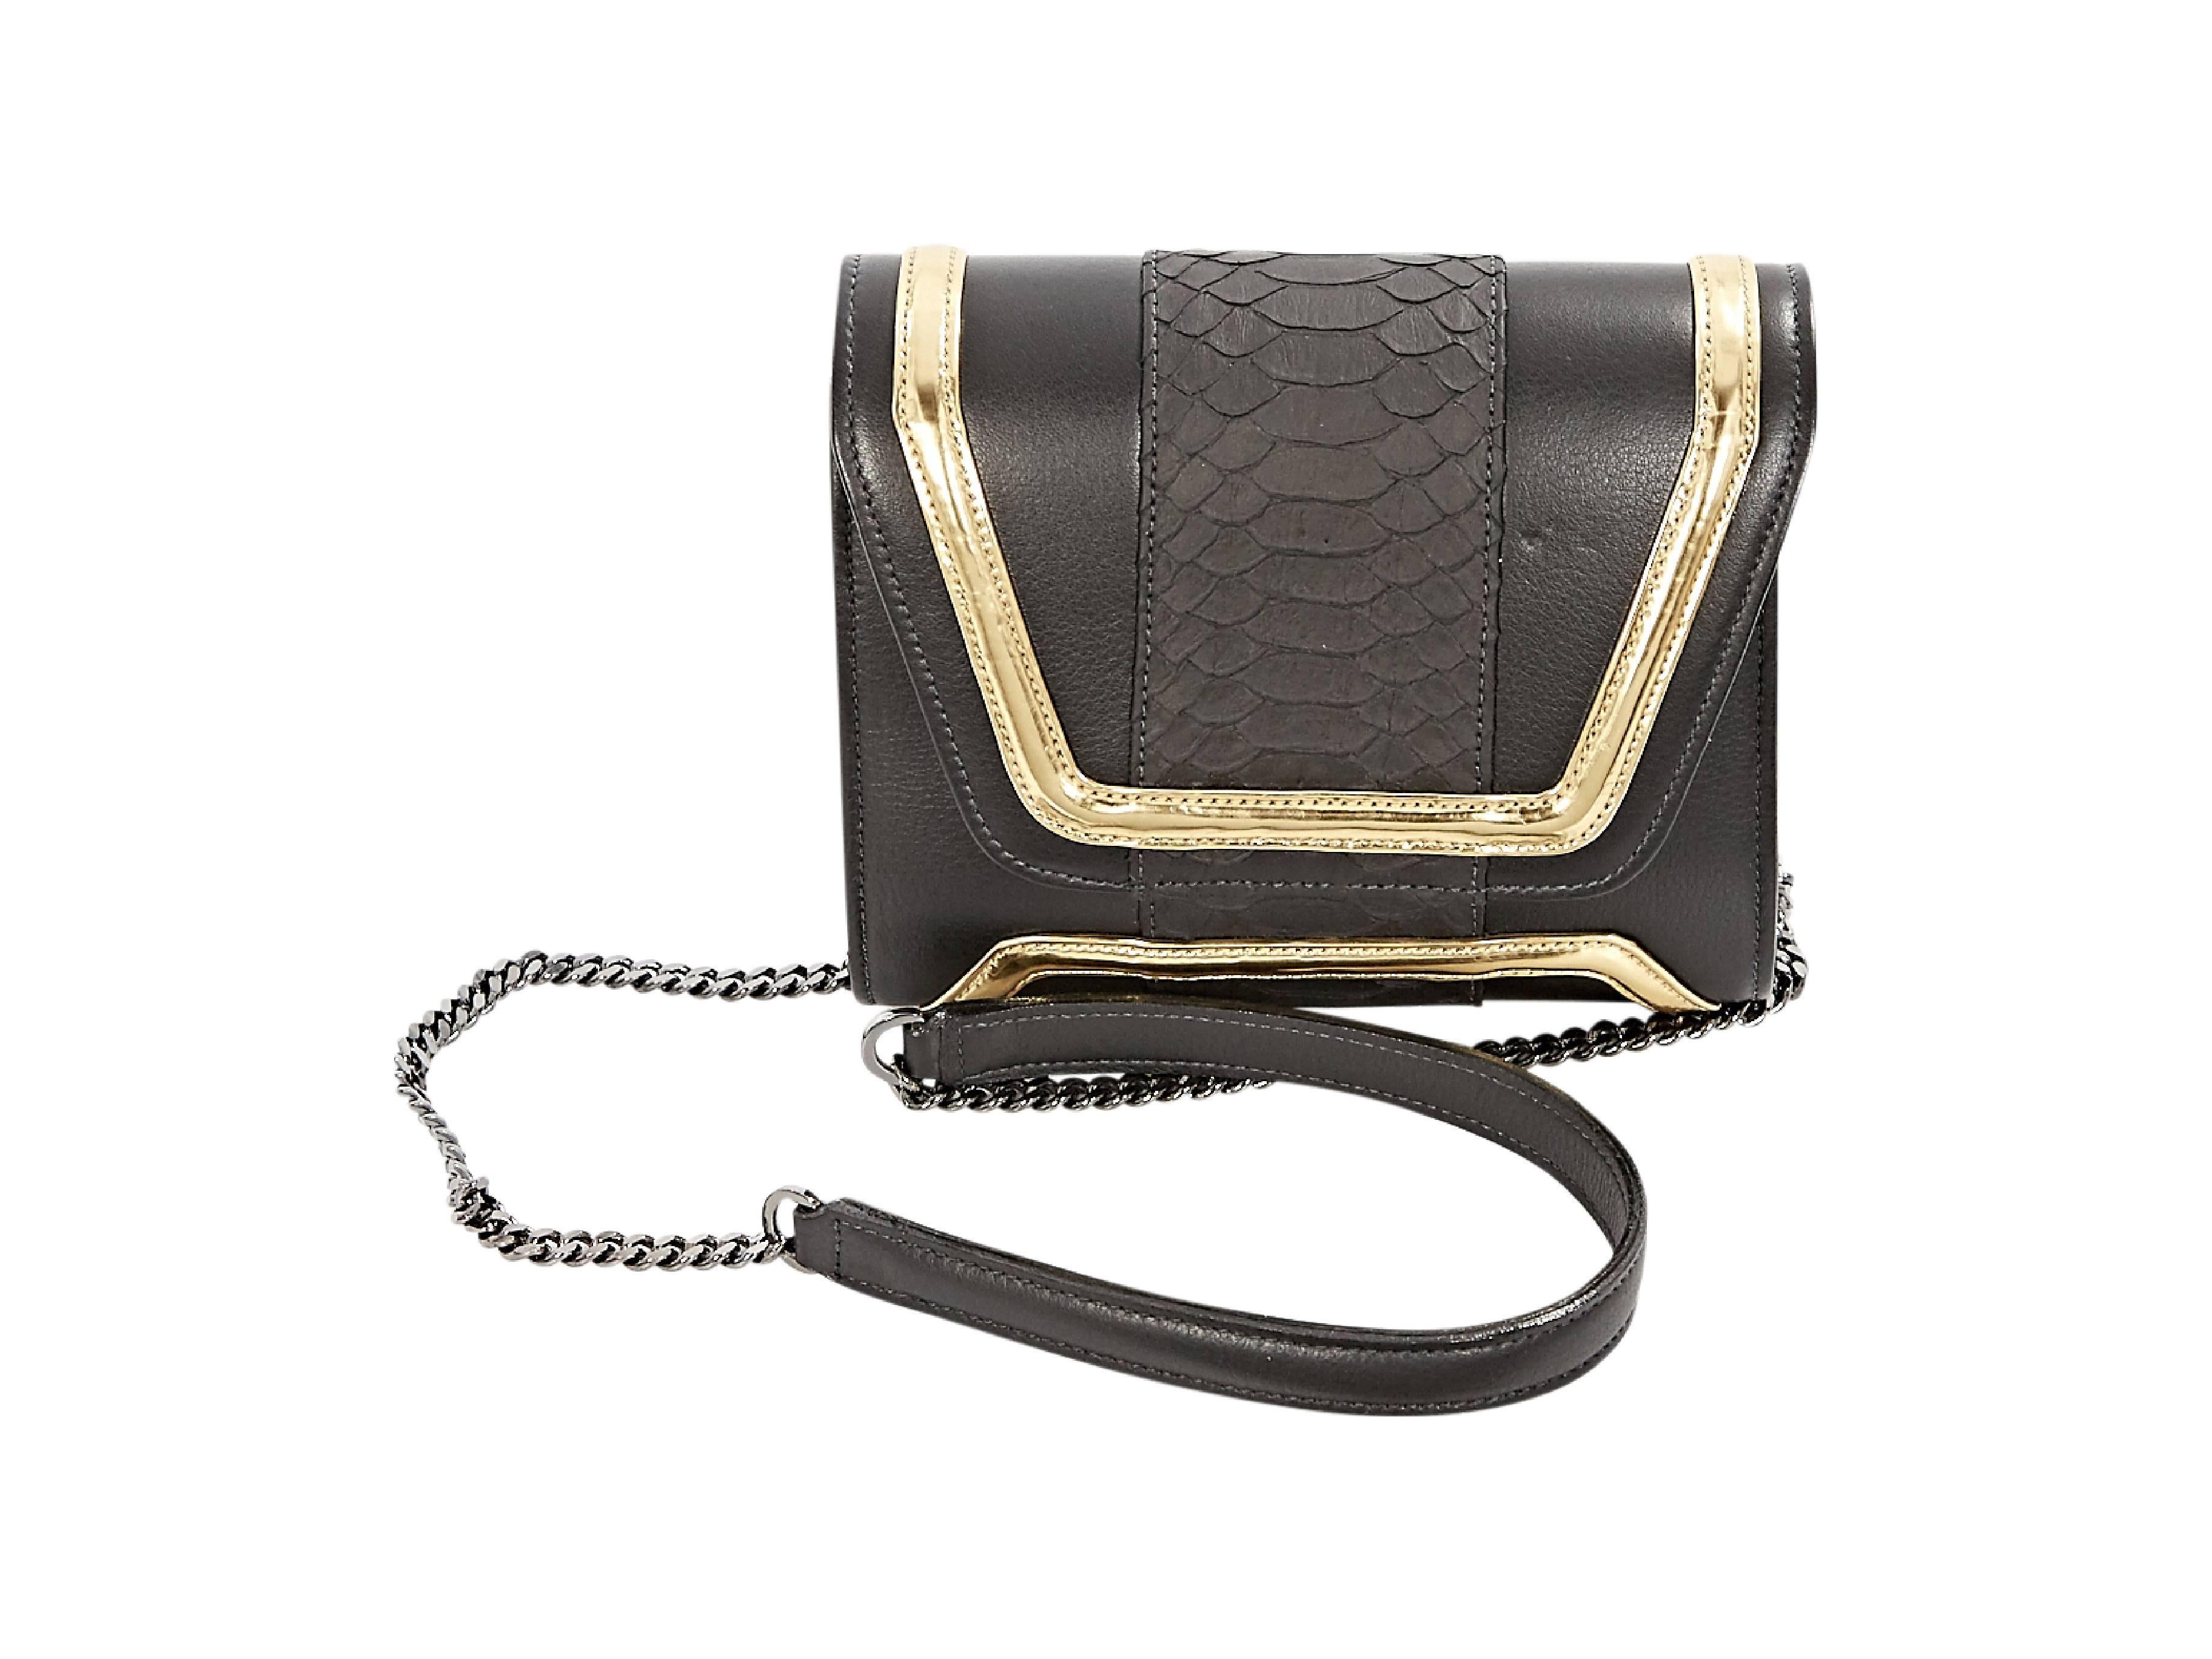 Black and gold leather crossbody bag by Yliana Yepez.  Snake-embossed center panel.  Tuck-away chain crossbody strap.  Front flap.  Lined interior with inner zip pocket.  Silvertone hardware.  7.5